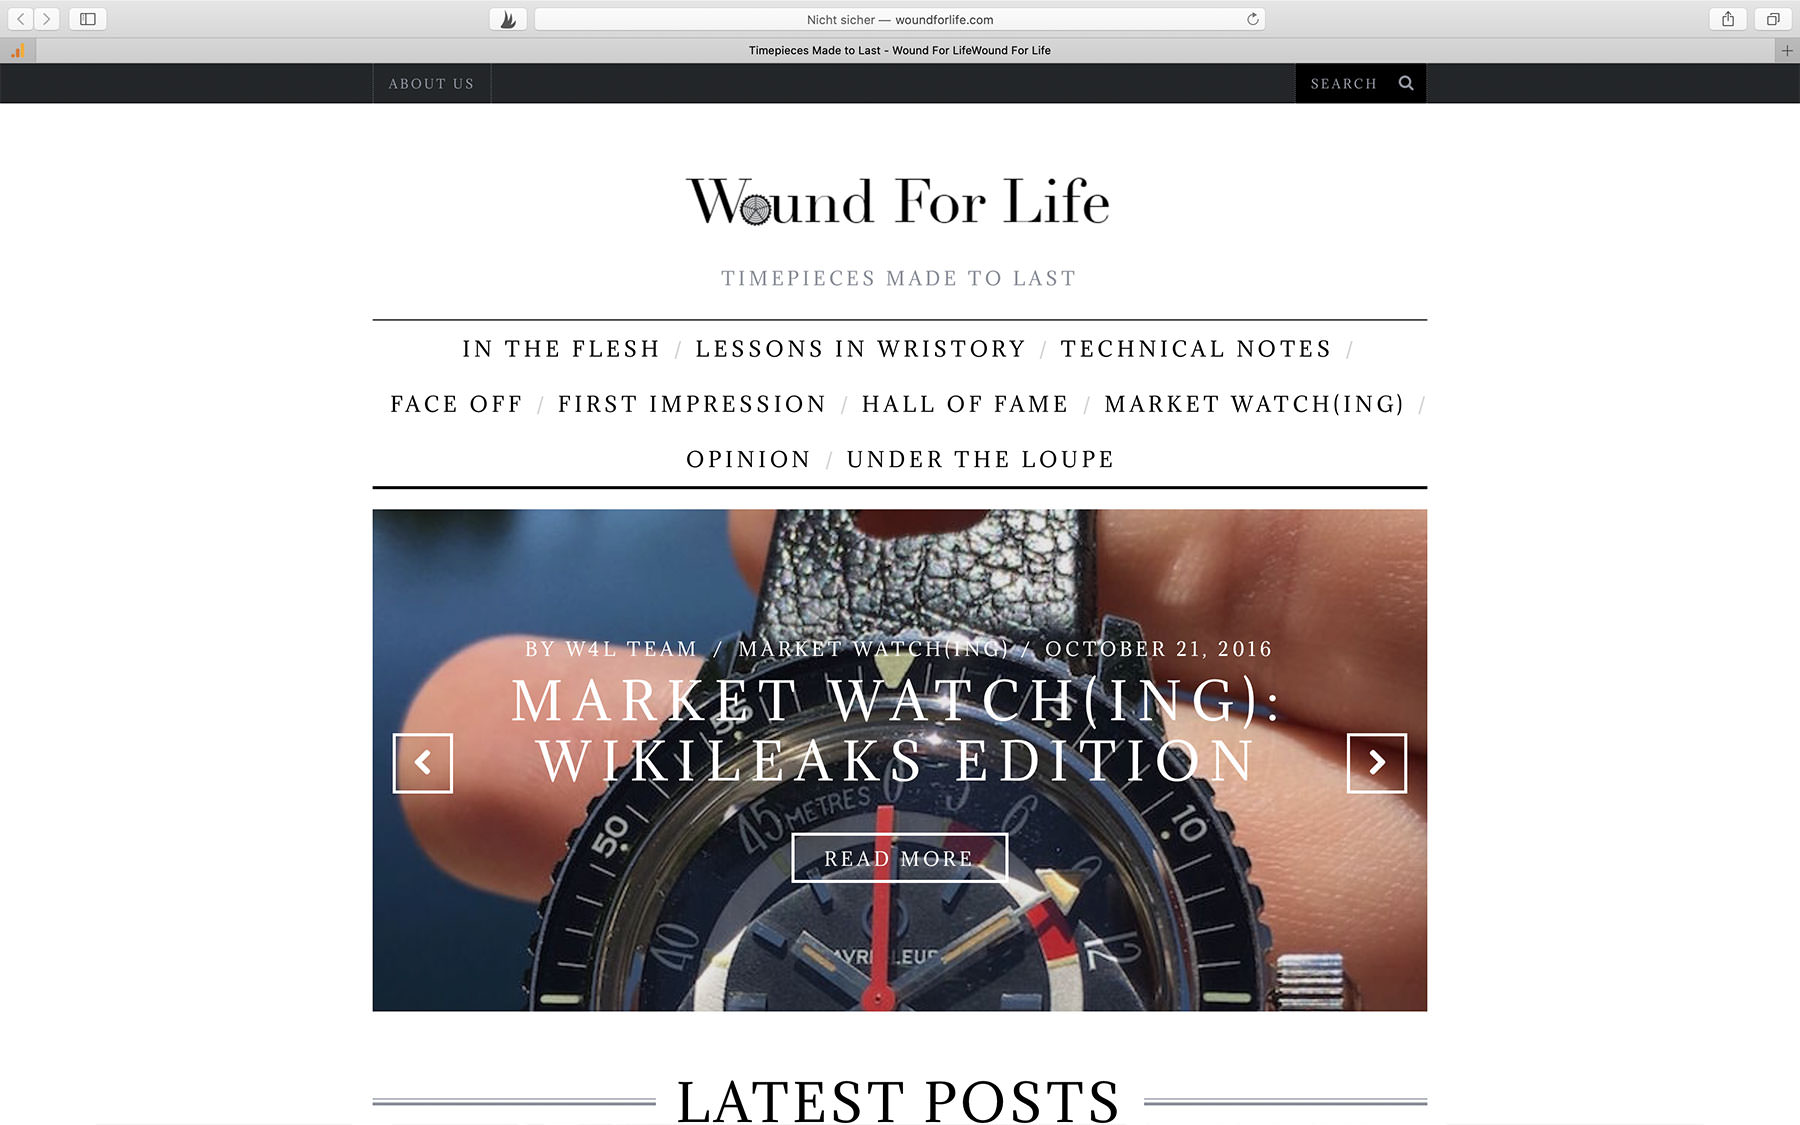 Watch Blogs wound for life